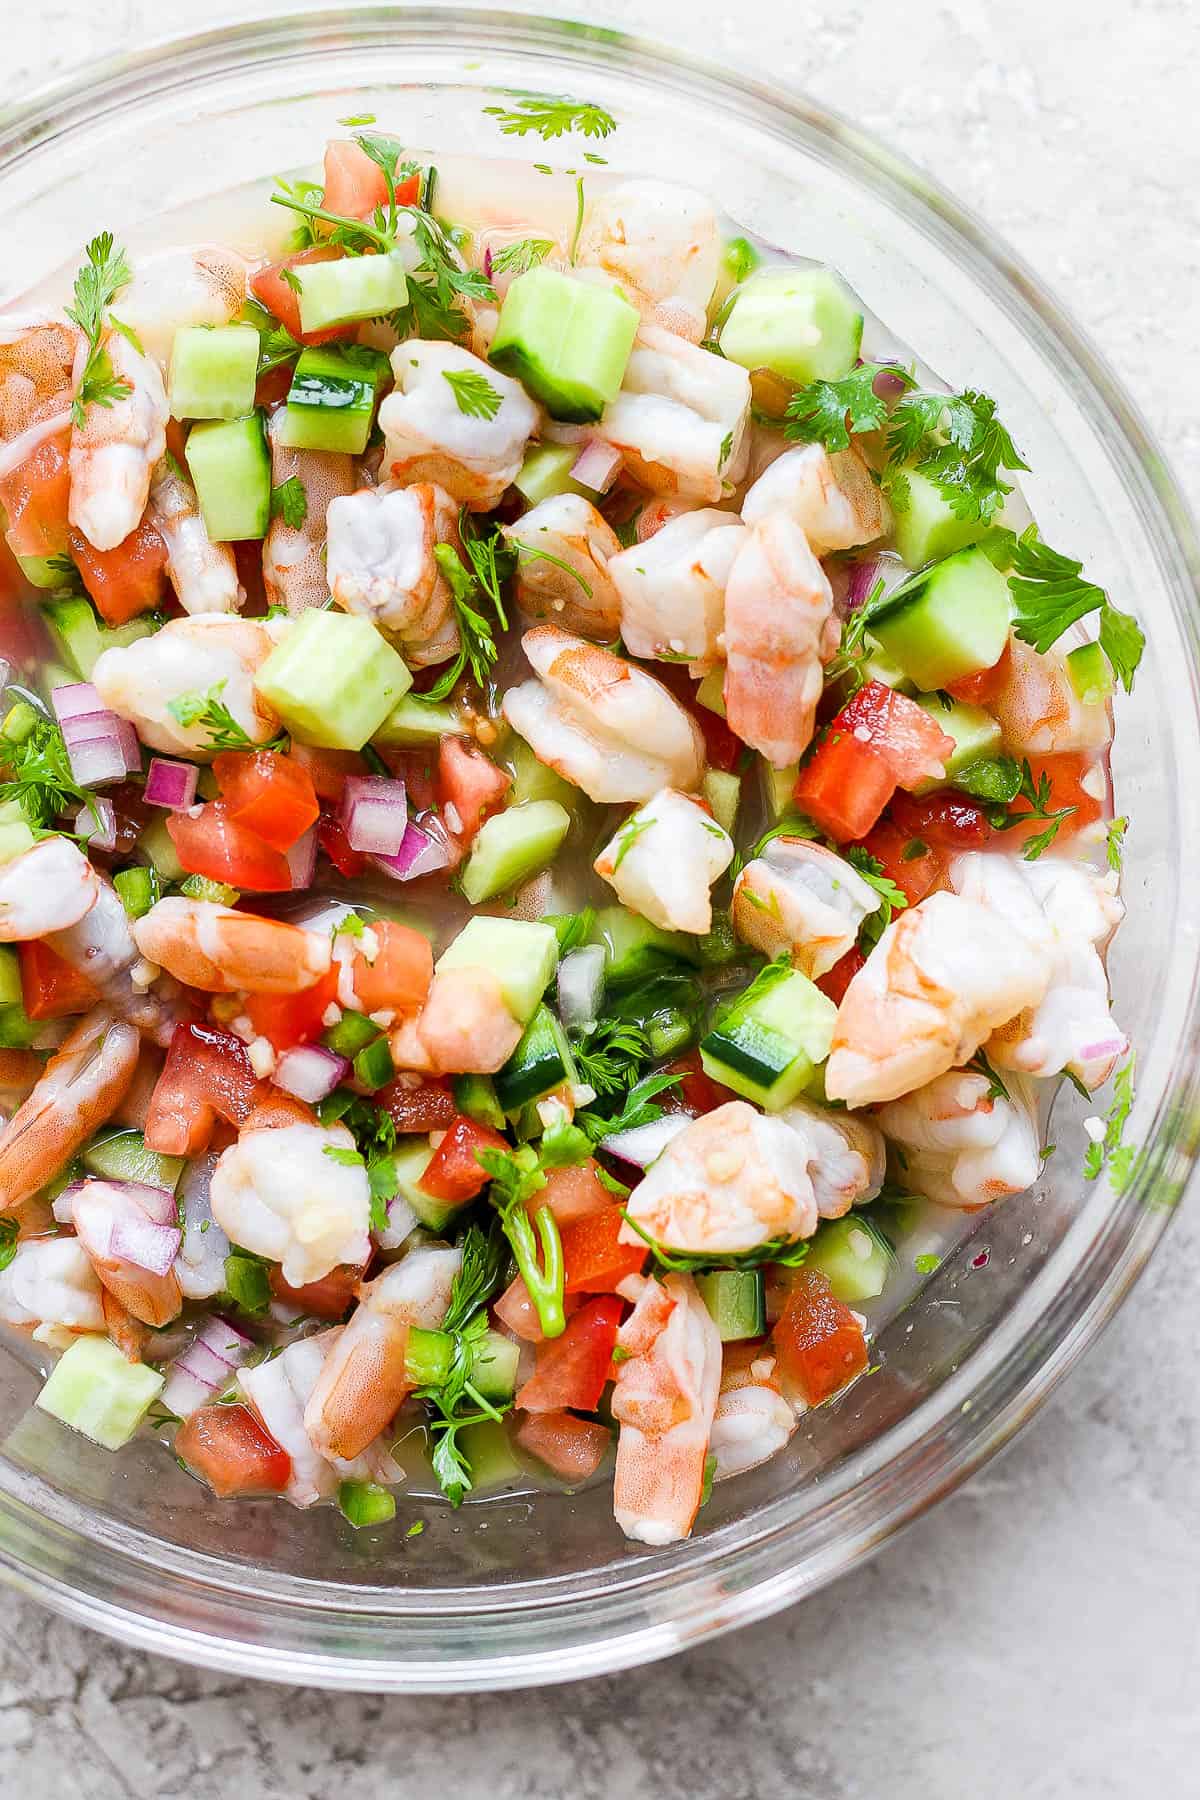 A bowl of ceviche made with shrimp, avocado, tomatoes, cilantro, red onion, and citrus juices.